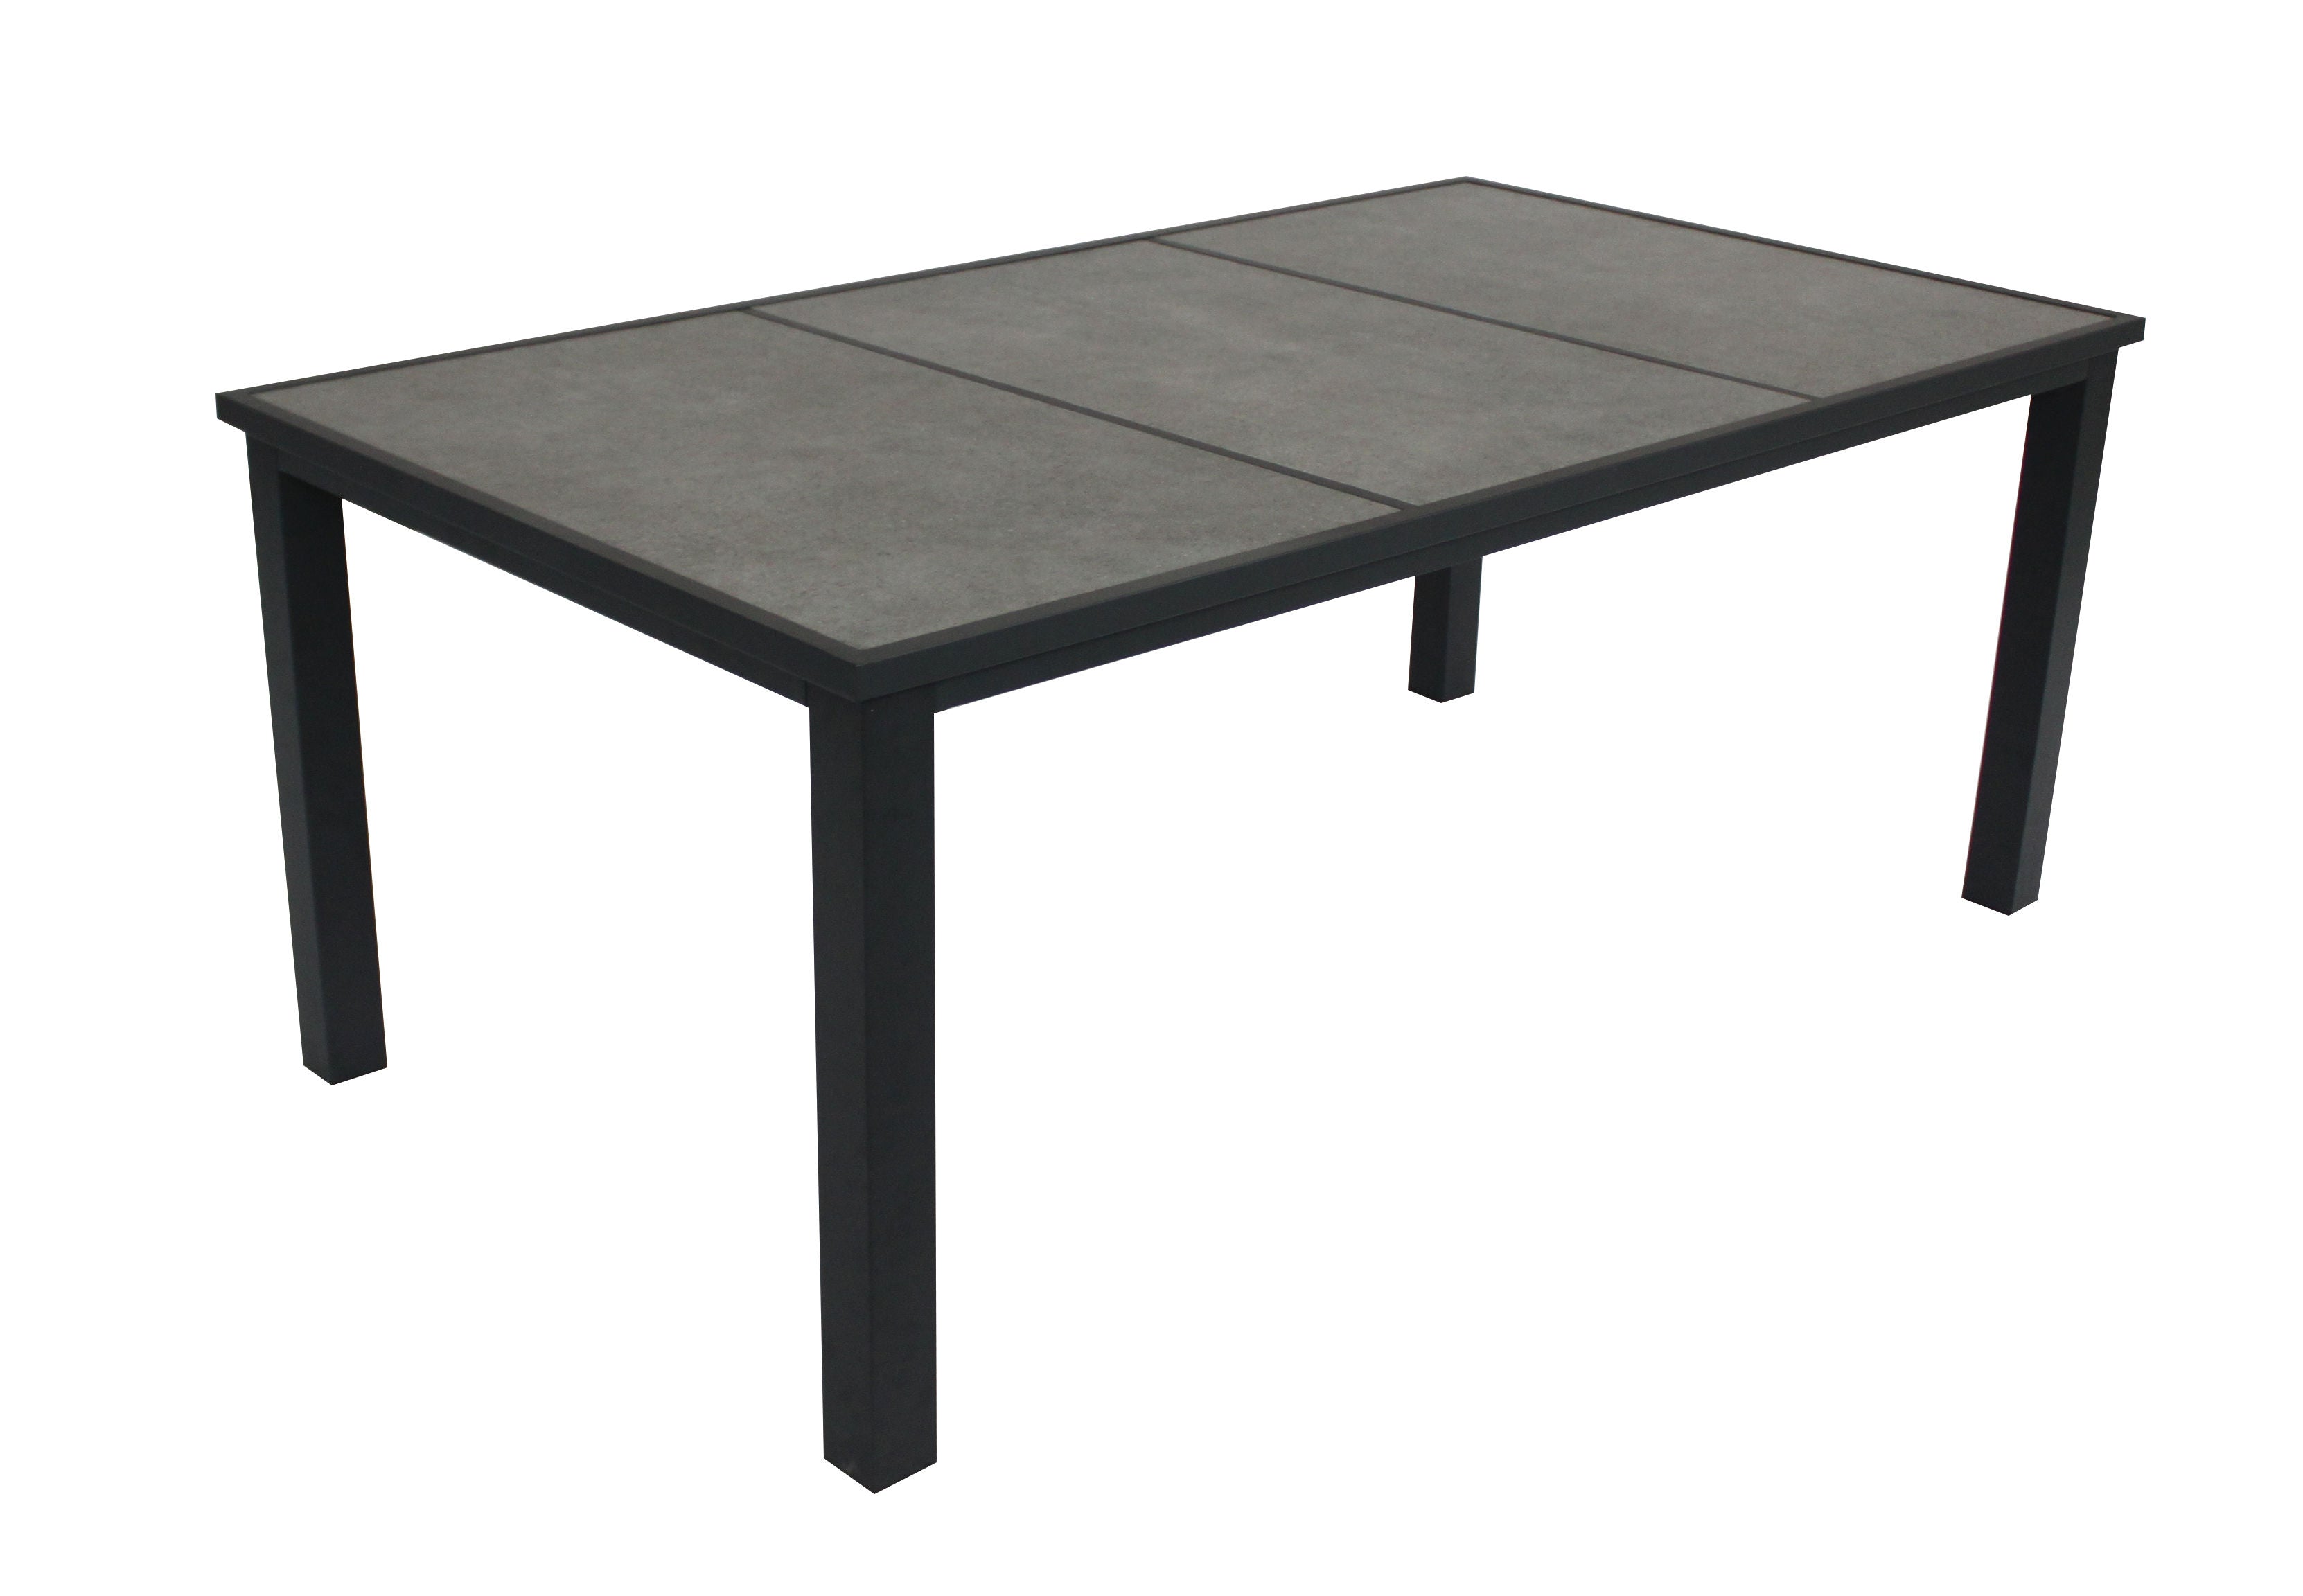 MOSS MOSS-0824C - Key West Collection, Charcoal aluminum rectangular table with 3 grey large ceramic panels for table top 74" x 42 3/8" x H 29.1"